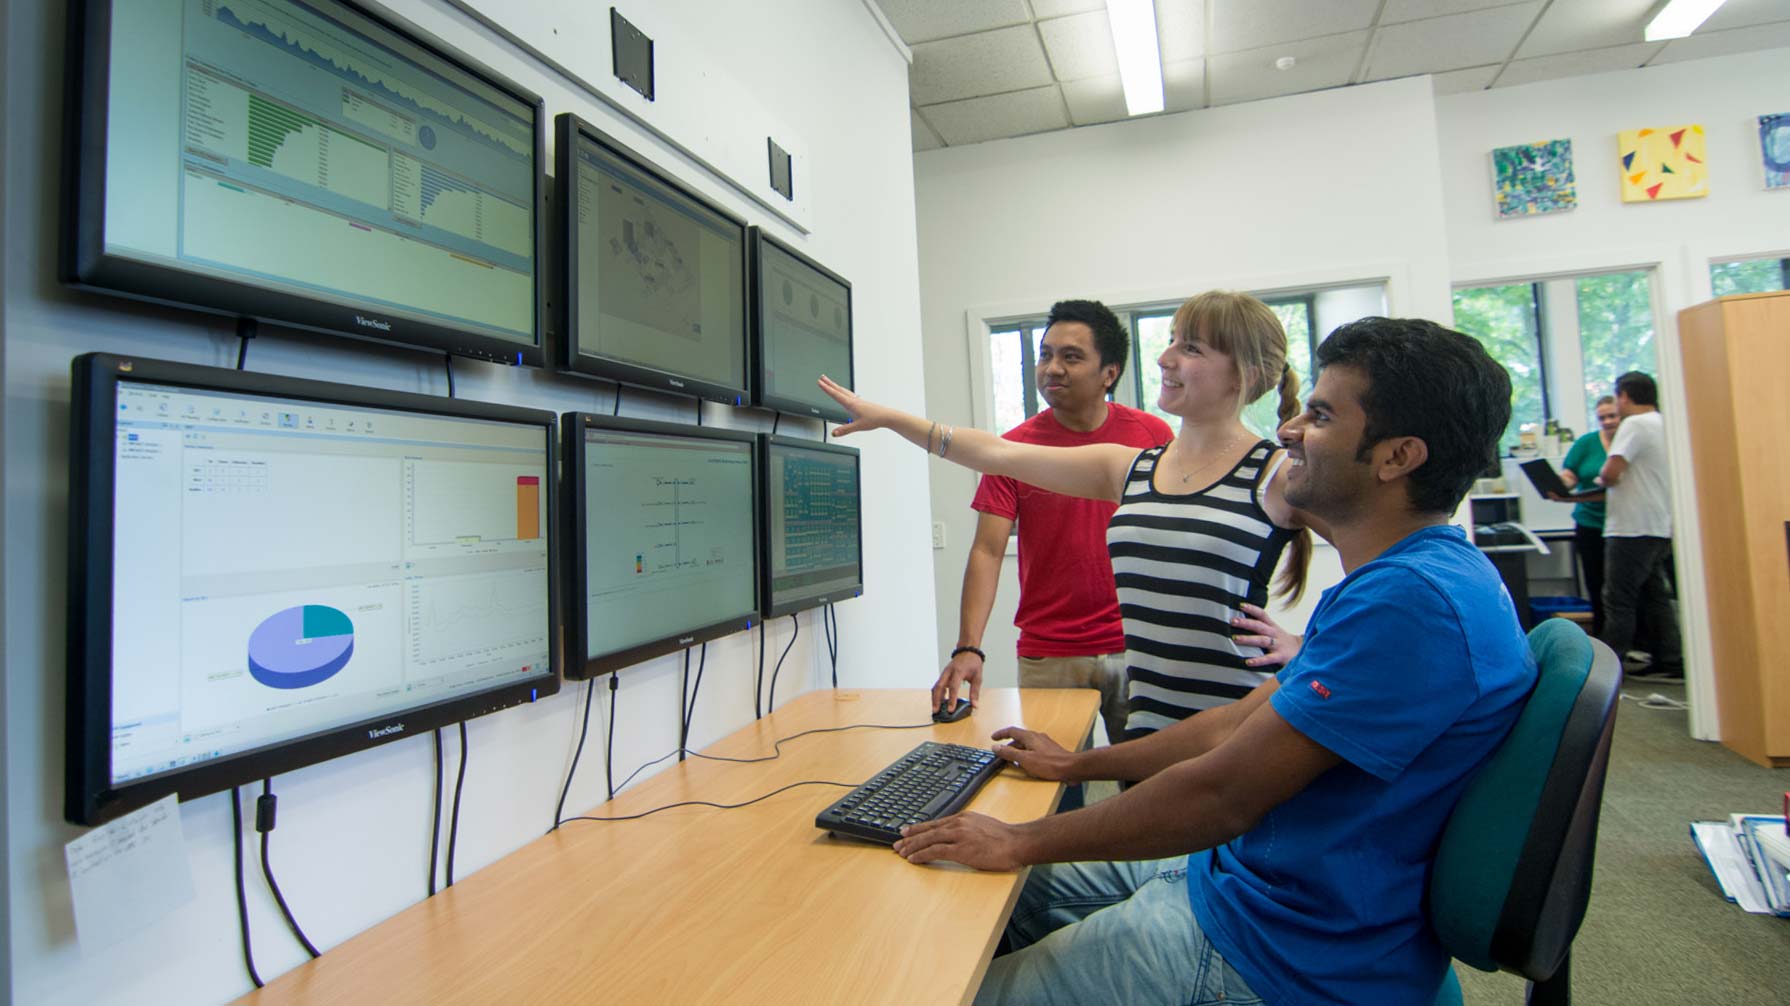 Bachelor of Information Technology network screens